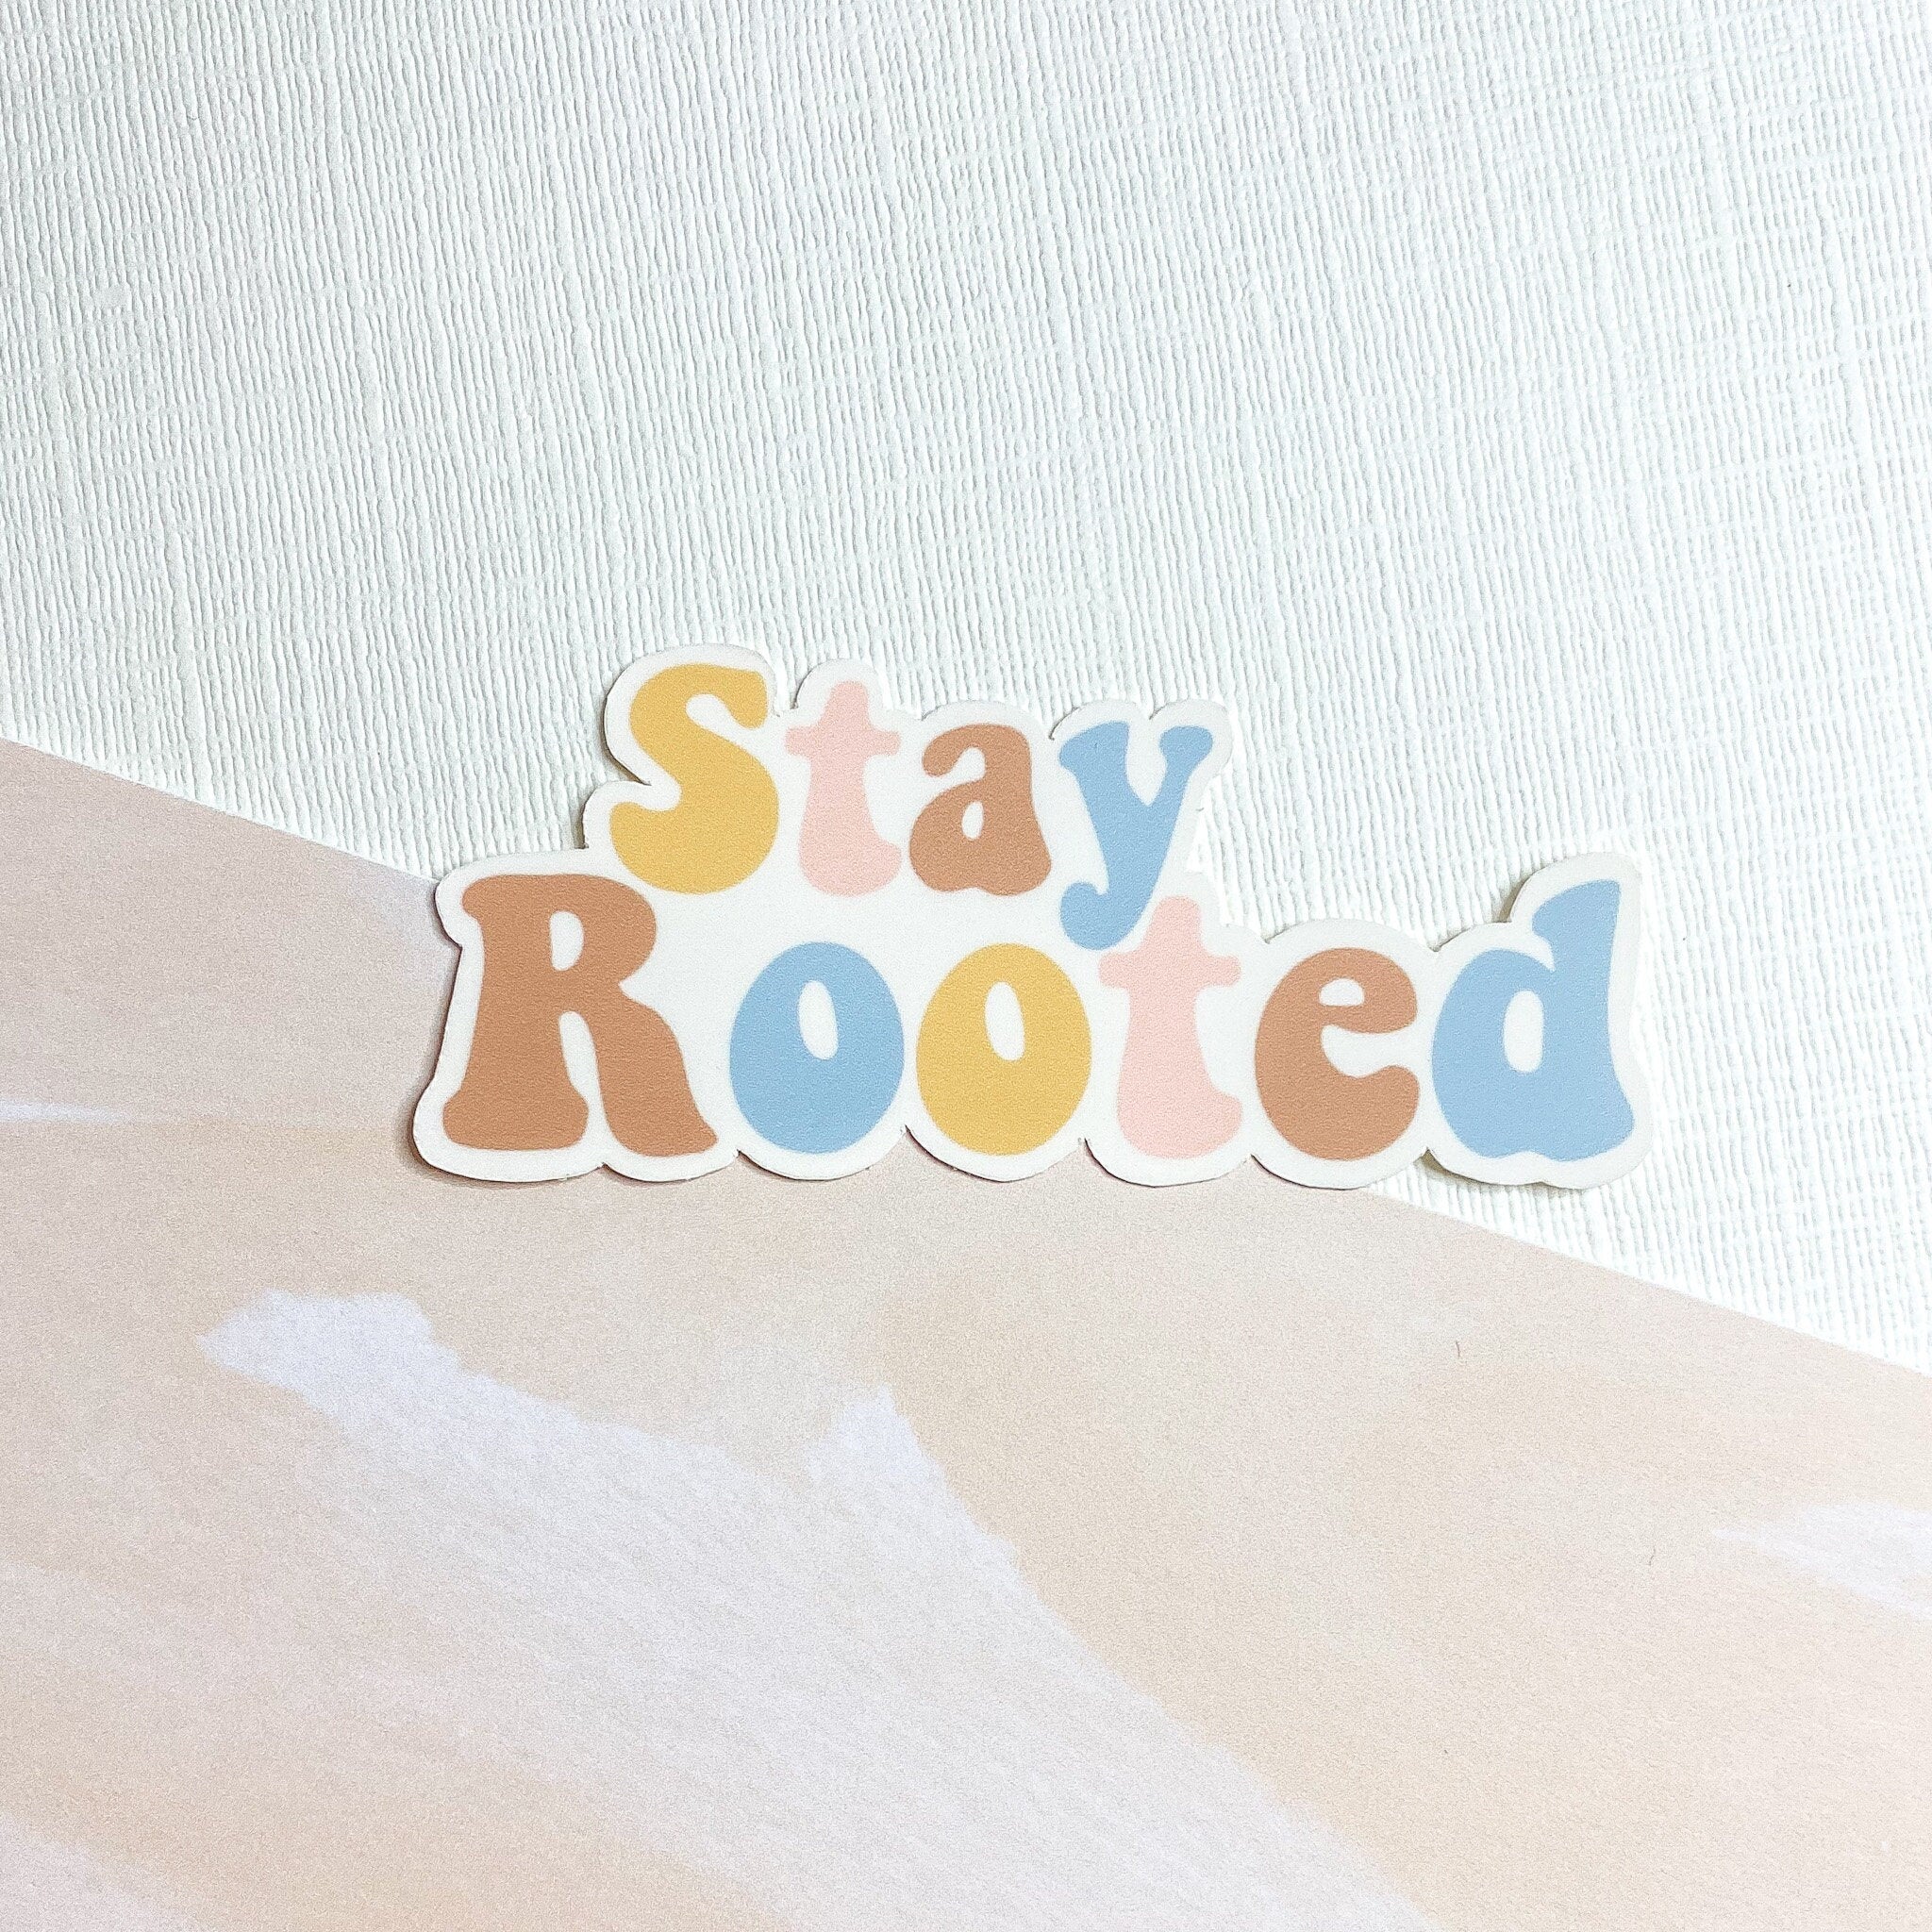 Stay Rooted Sticker